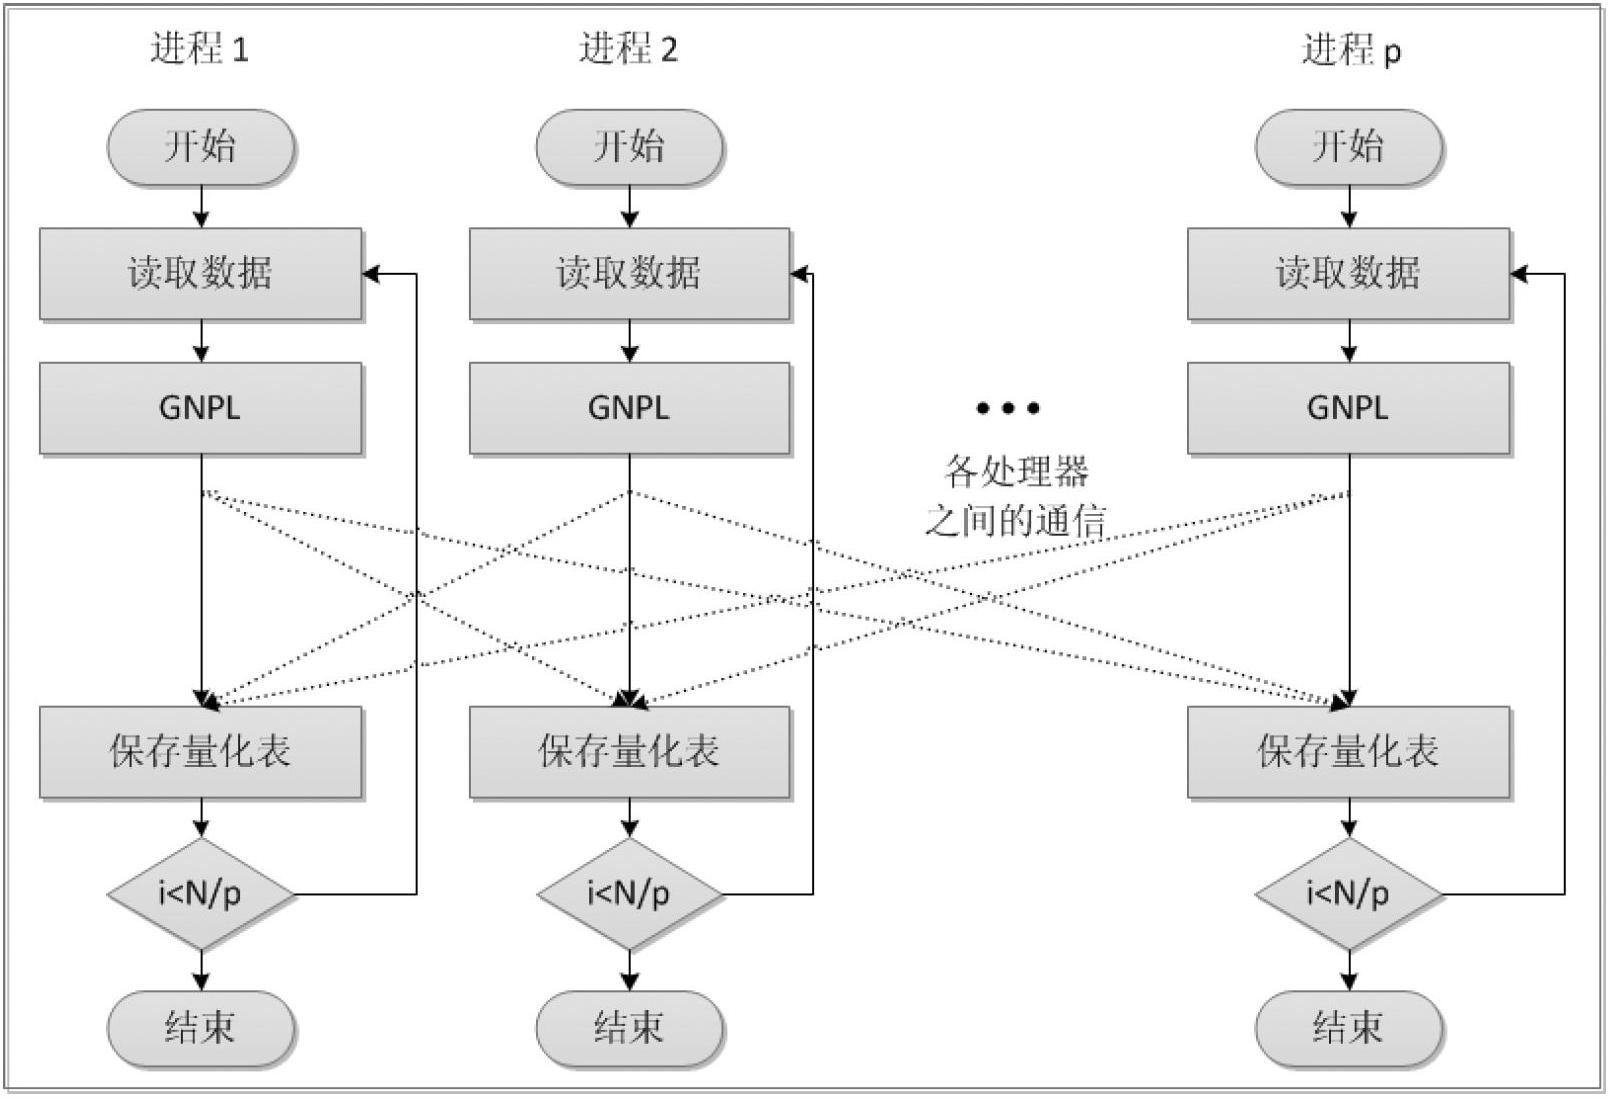 Multi-channel quantification and hierarchical clustering method based on multi-core parallel computation